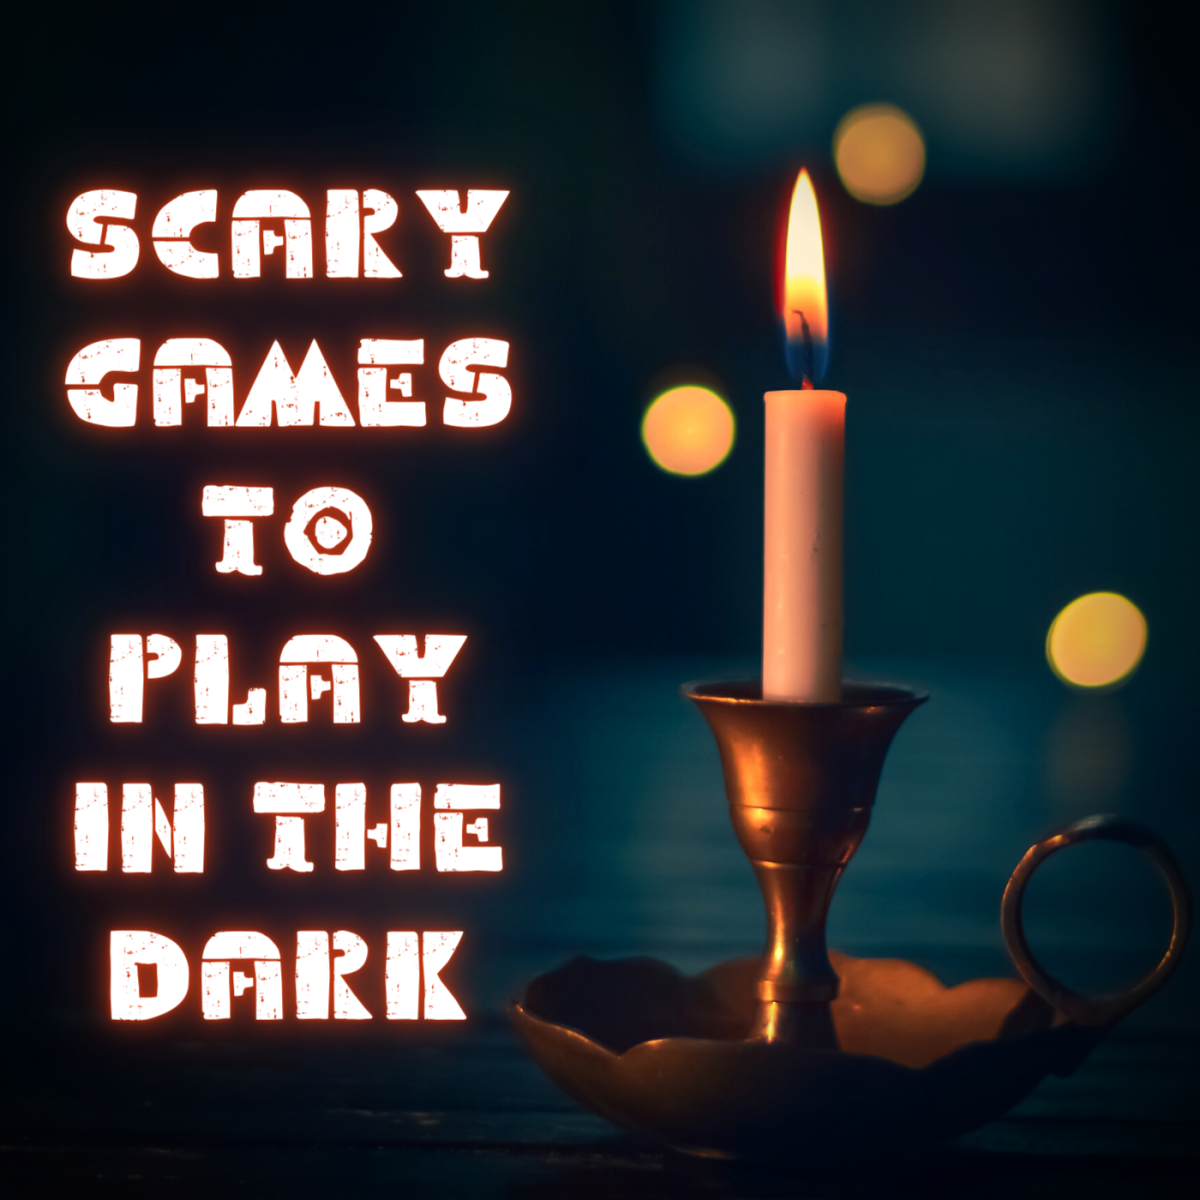 Try one of these suggestions for a scary game to play in the dark!